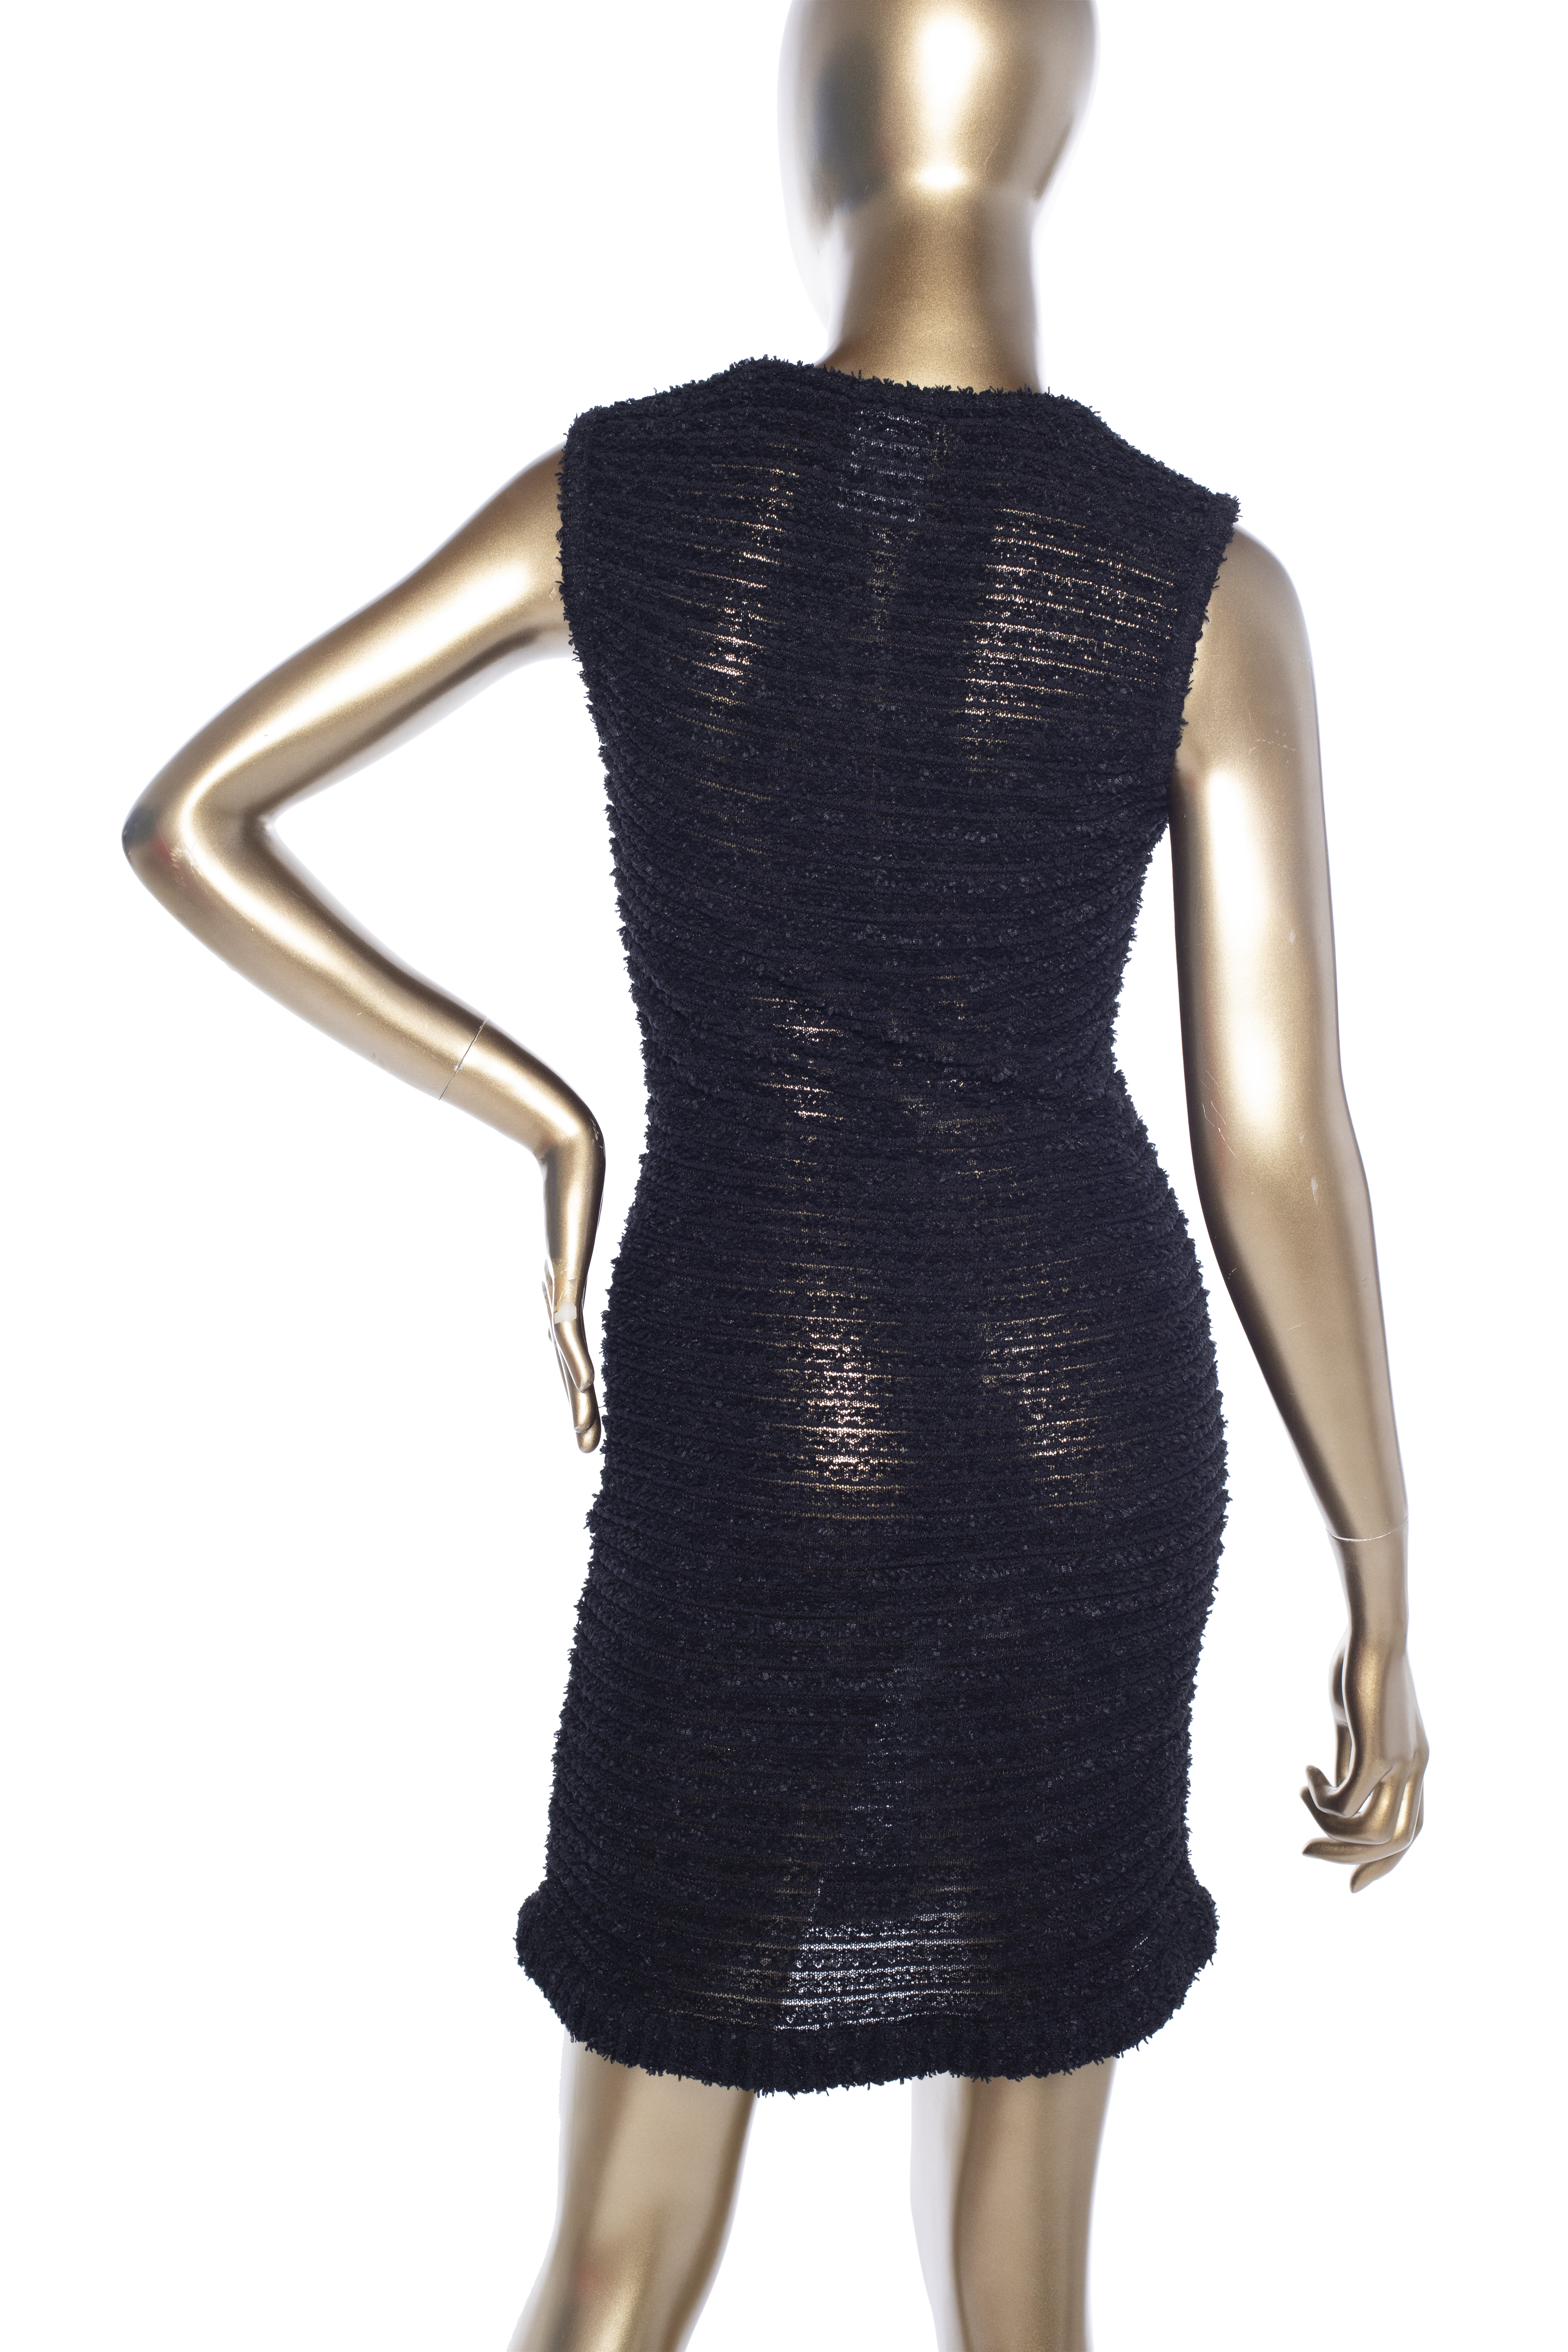 Chanel Ribbed Knit Dress in Black Size 36